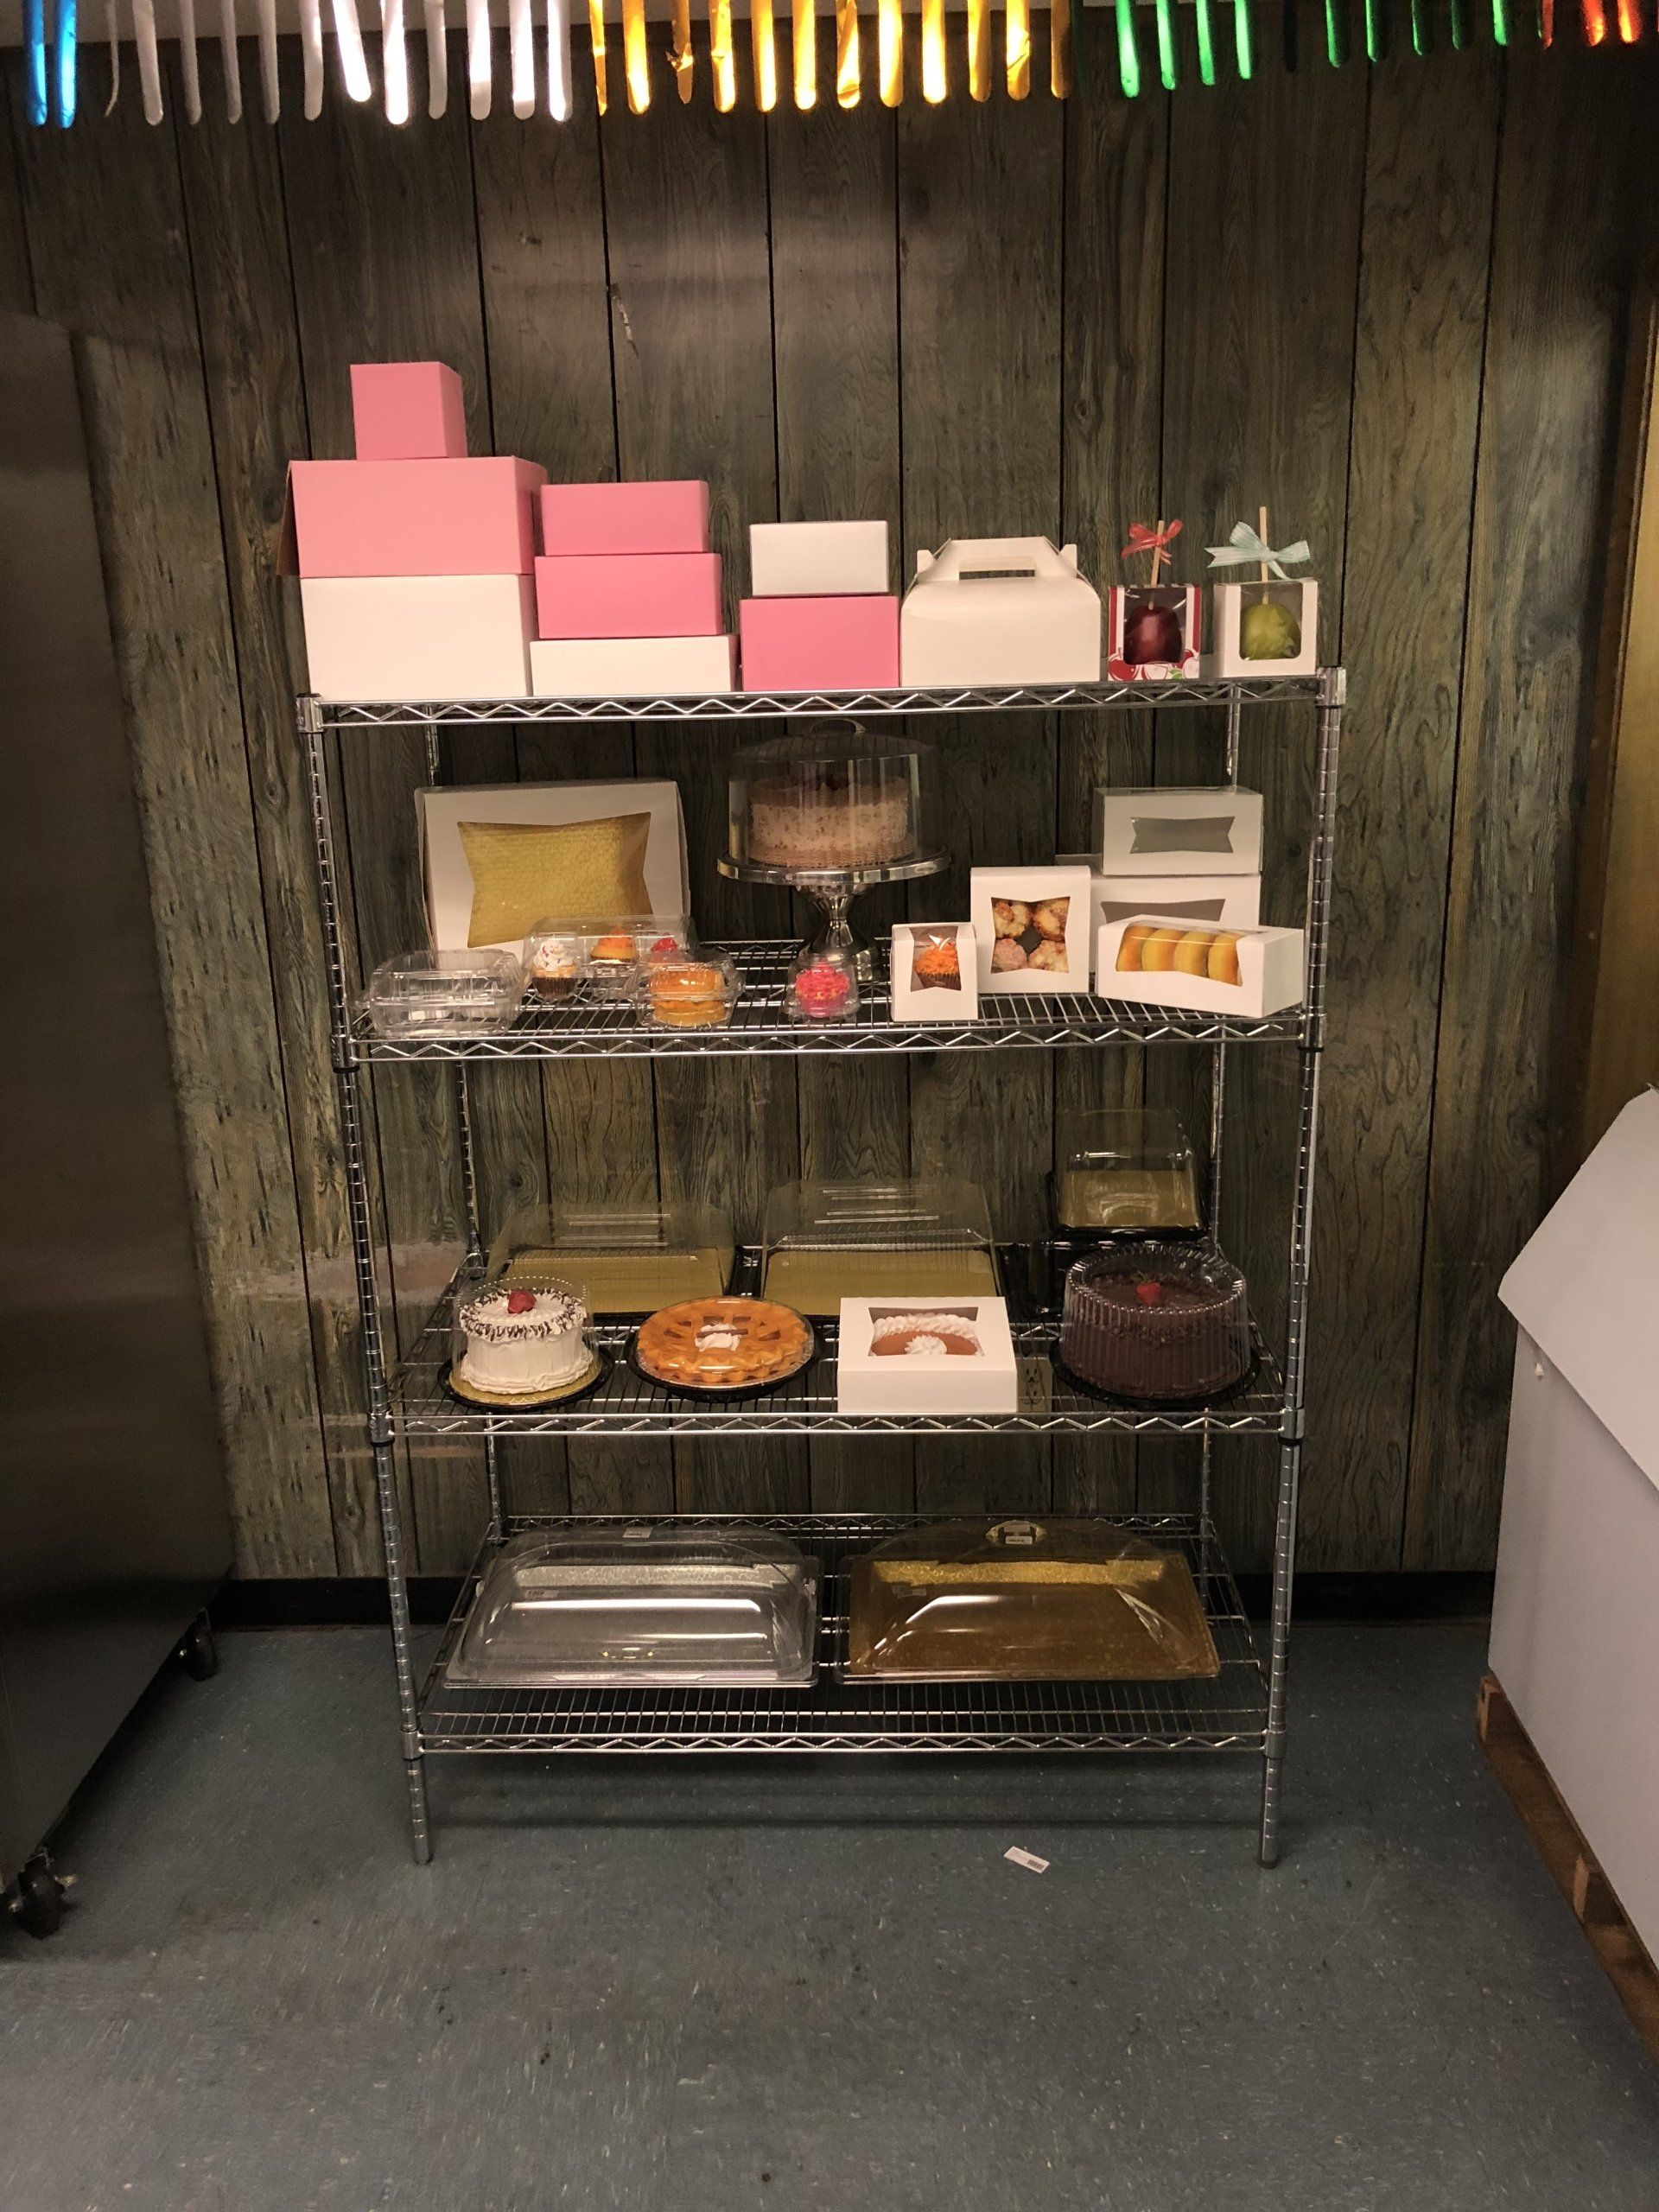 bakery items in boxes on shelving